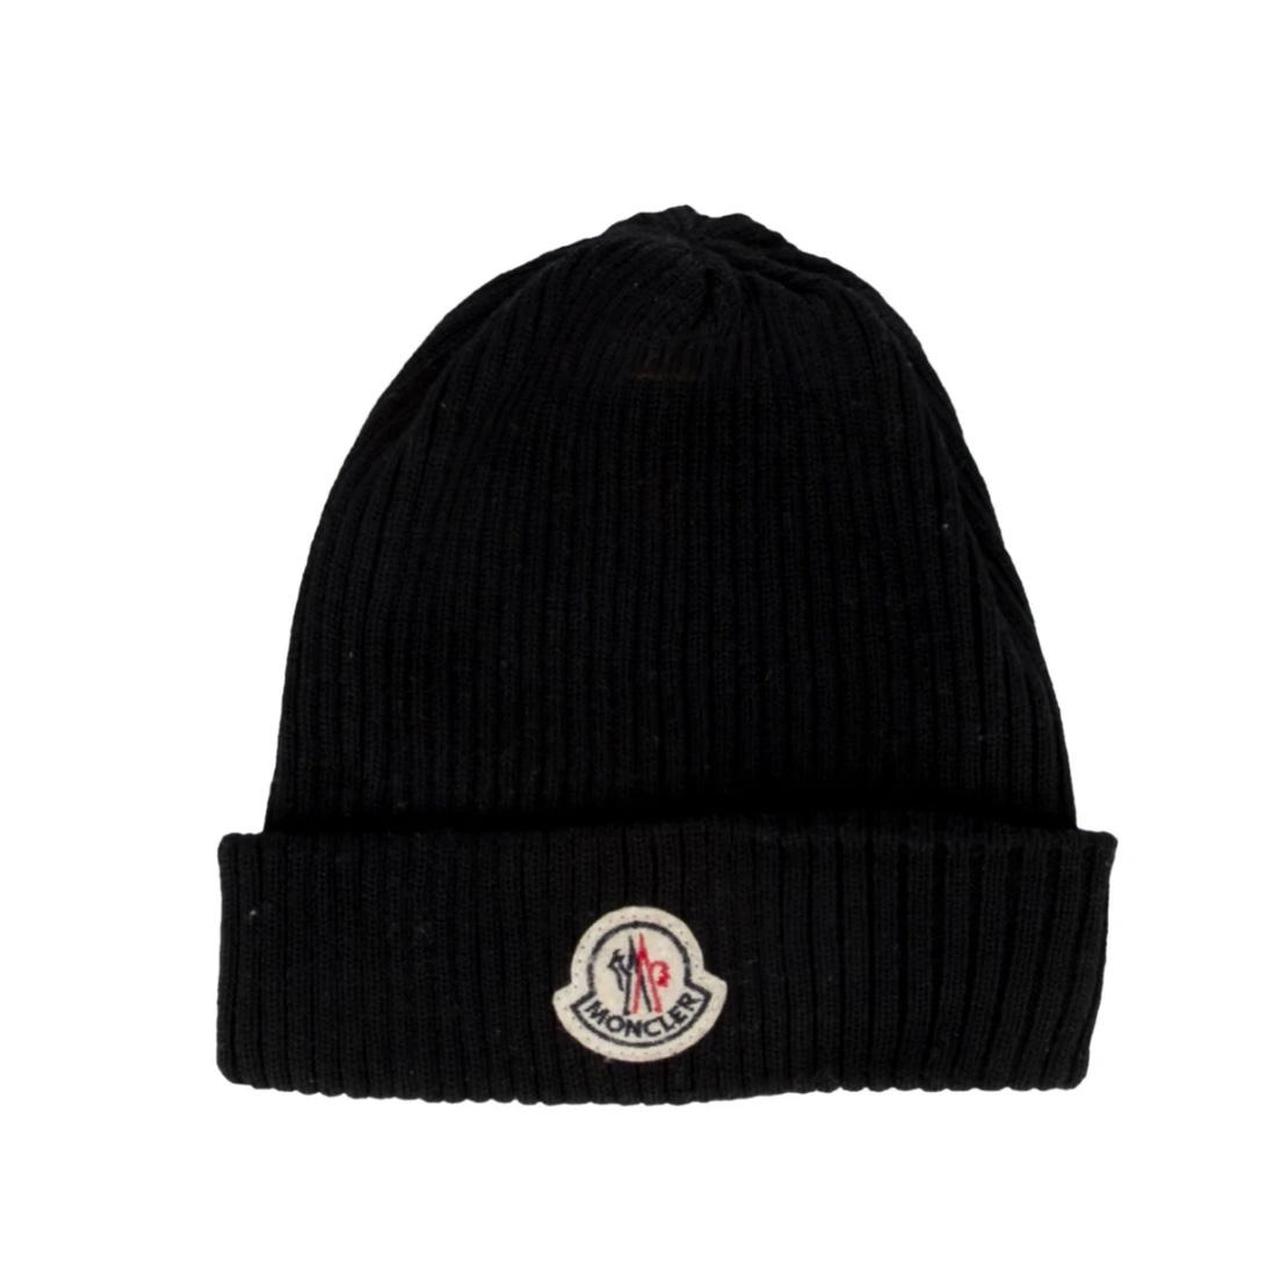 Moncler beanie Authentic In great condition These... - Depop